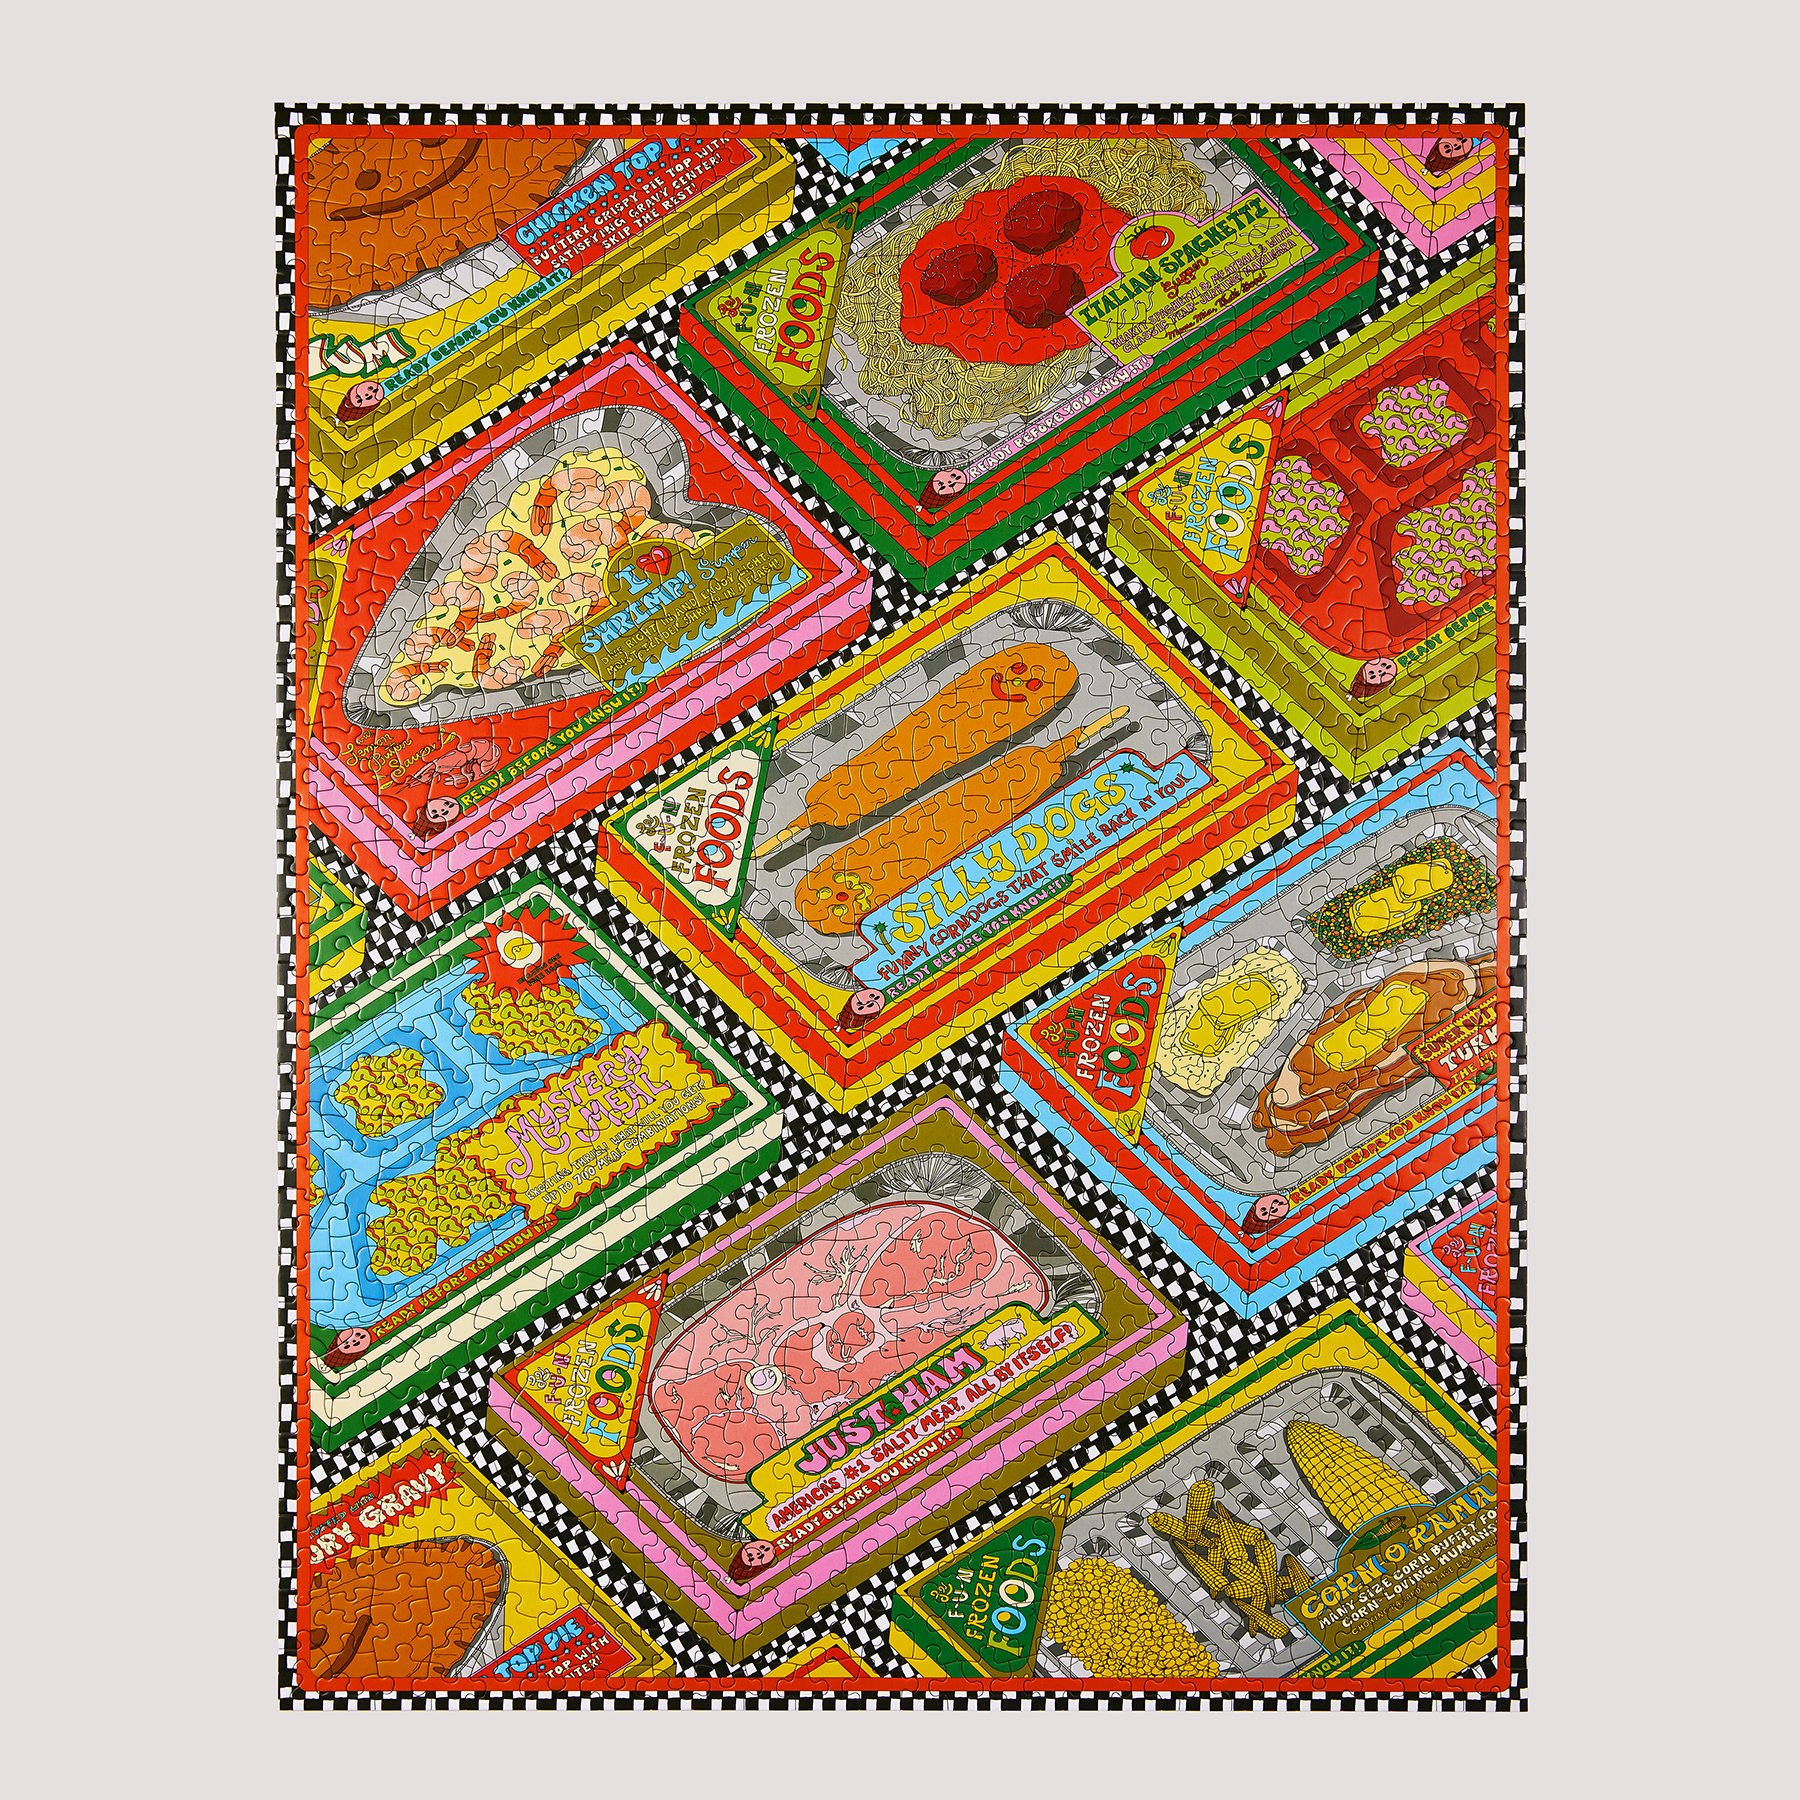  “TV Dinner” 1,000 piece puzzle design for Le Puzz, a new puzzle brand based in Brooklyn, NY. Digital illustration designed and assembled with microwave meals of the past in mind, 2023. Images courtesy of Alistair Matthews &amp; Le Puzz. 